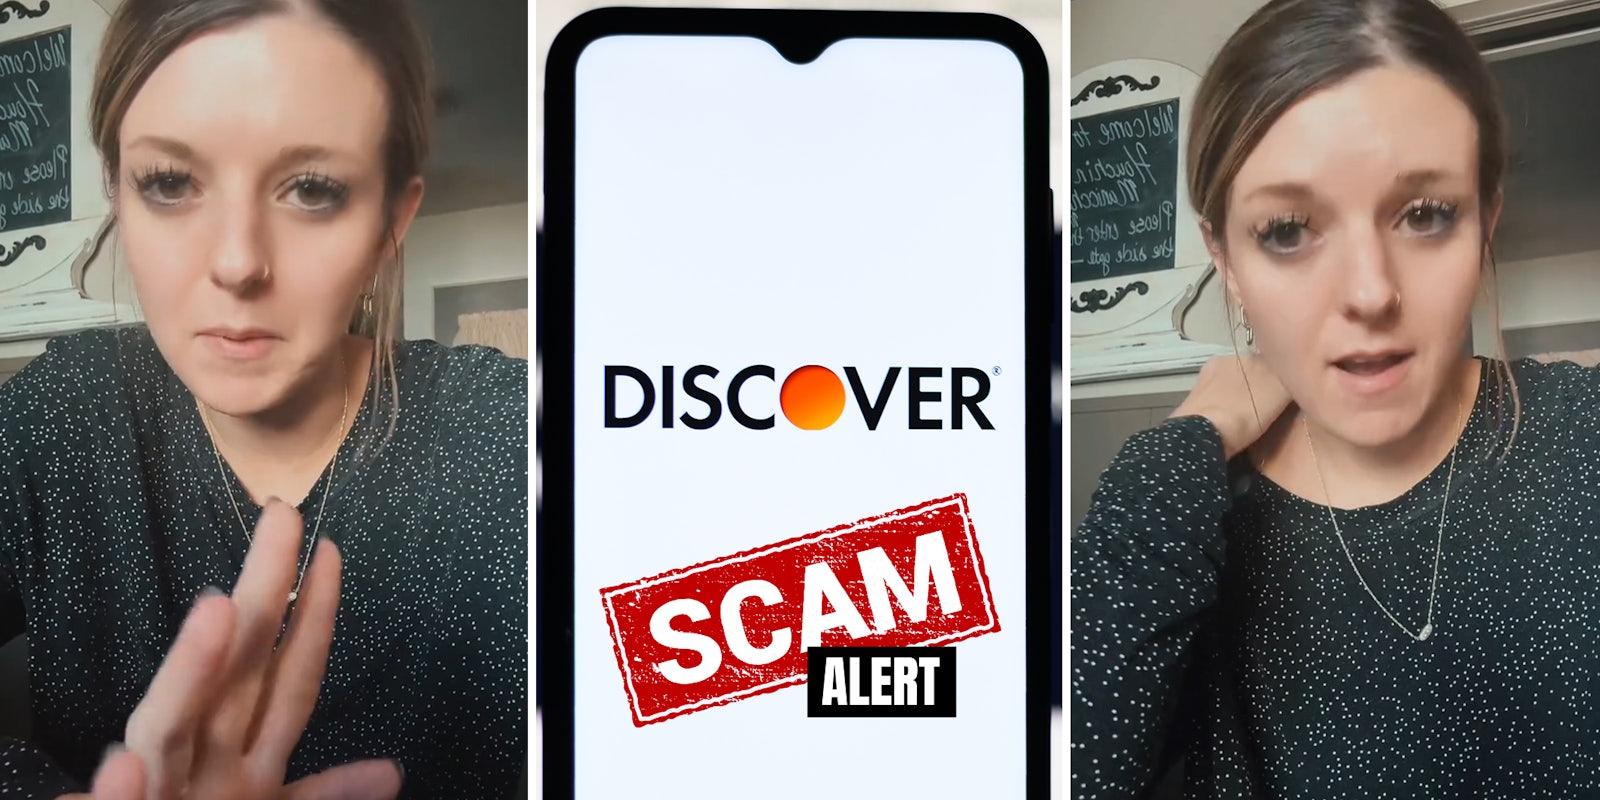 Discover customer gets verified call from her bank. It’s a troublingly precise new scam